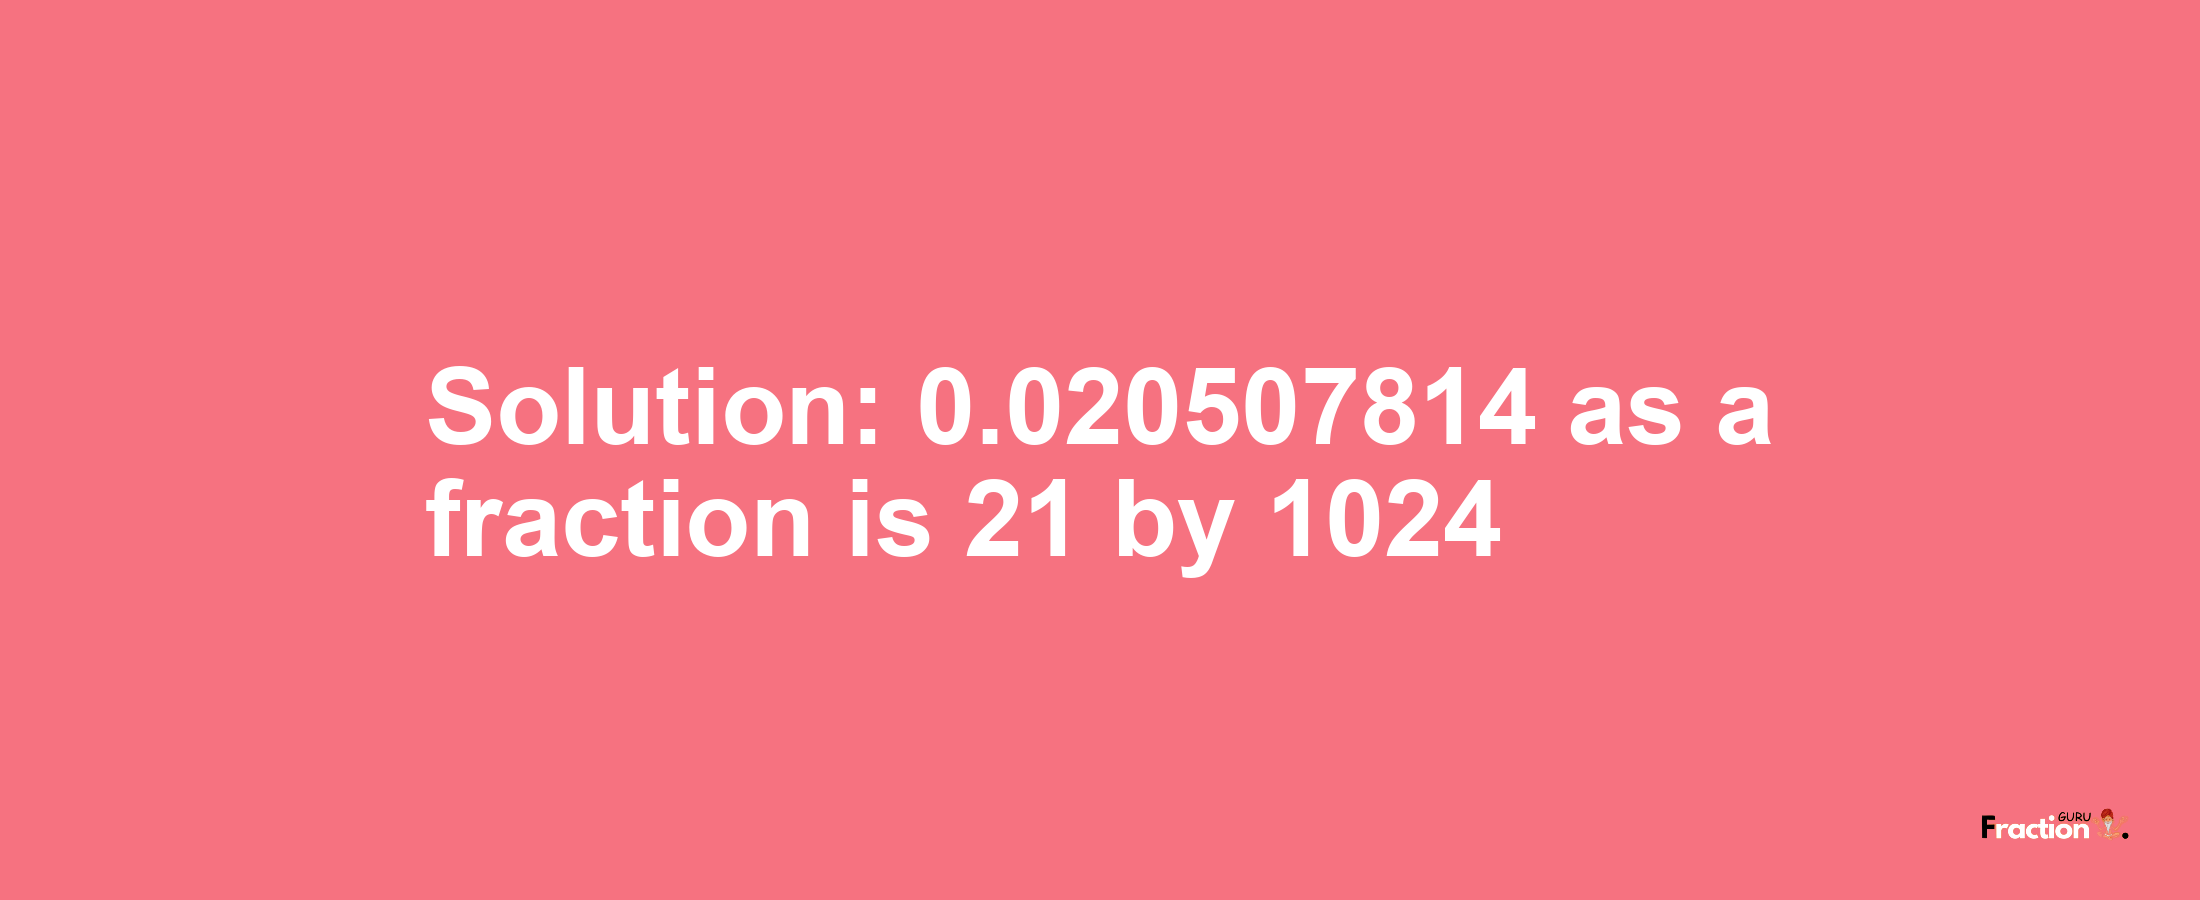 Solution:0.020507814 as a fraction is 21/1024